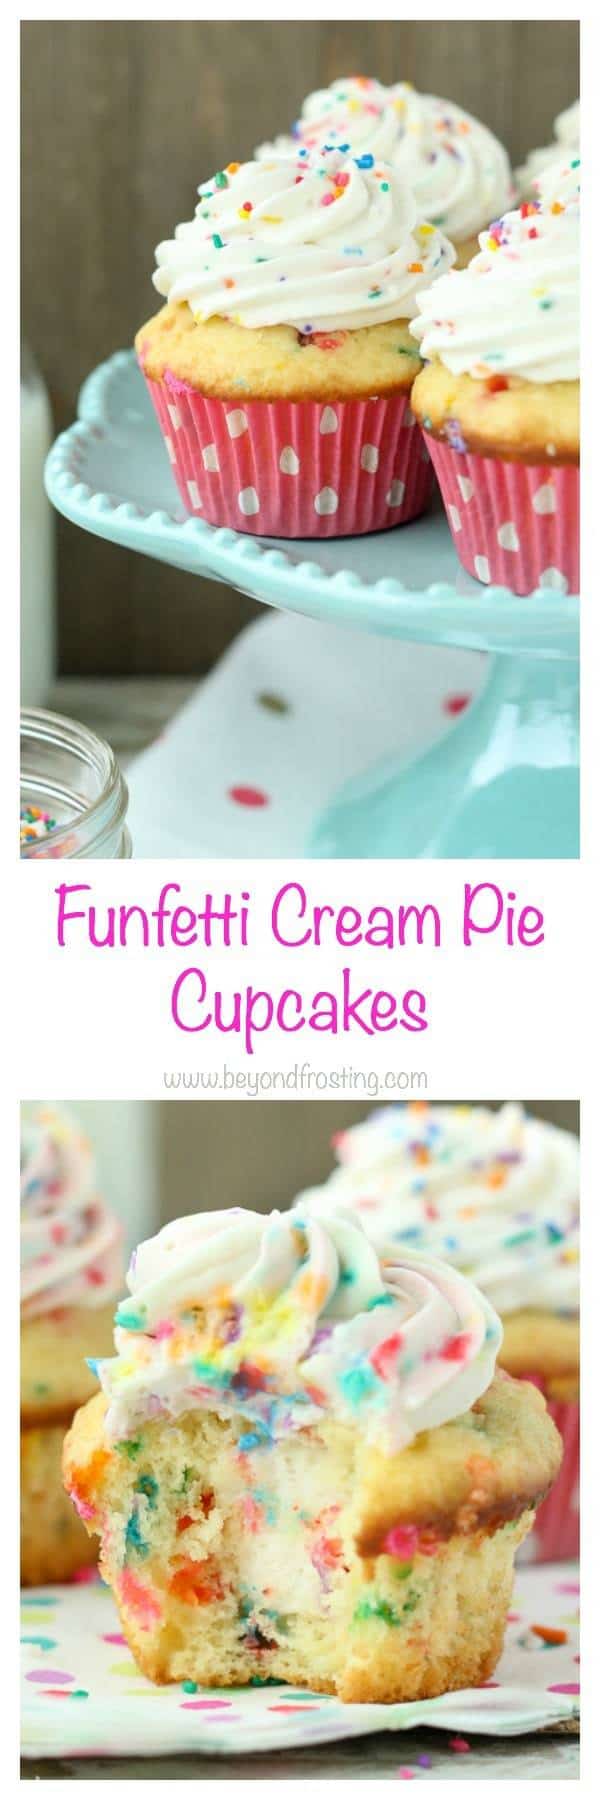  Triple Funfetti Cream Pie Cupcakes are the best funfetii cupcakes you’ll ever eat. It starts with a vanilla funfetti cupcakes, then it’s filled with an easy vanilla mousse. Finally it's topped with a batch of cake batter whipped cream.